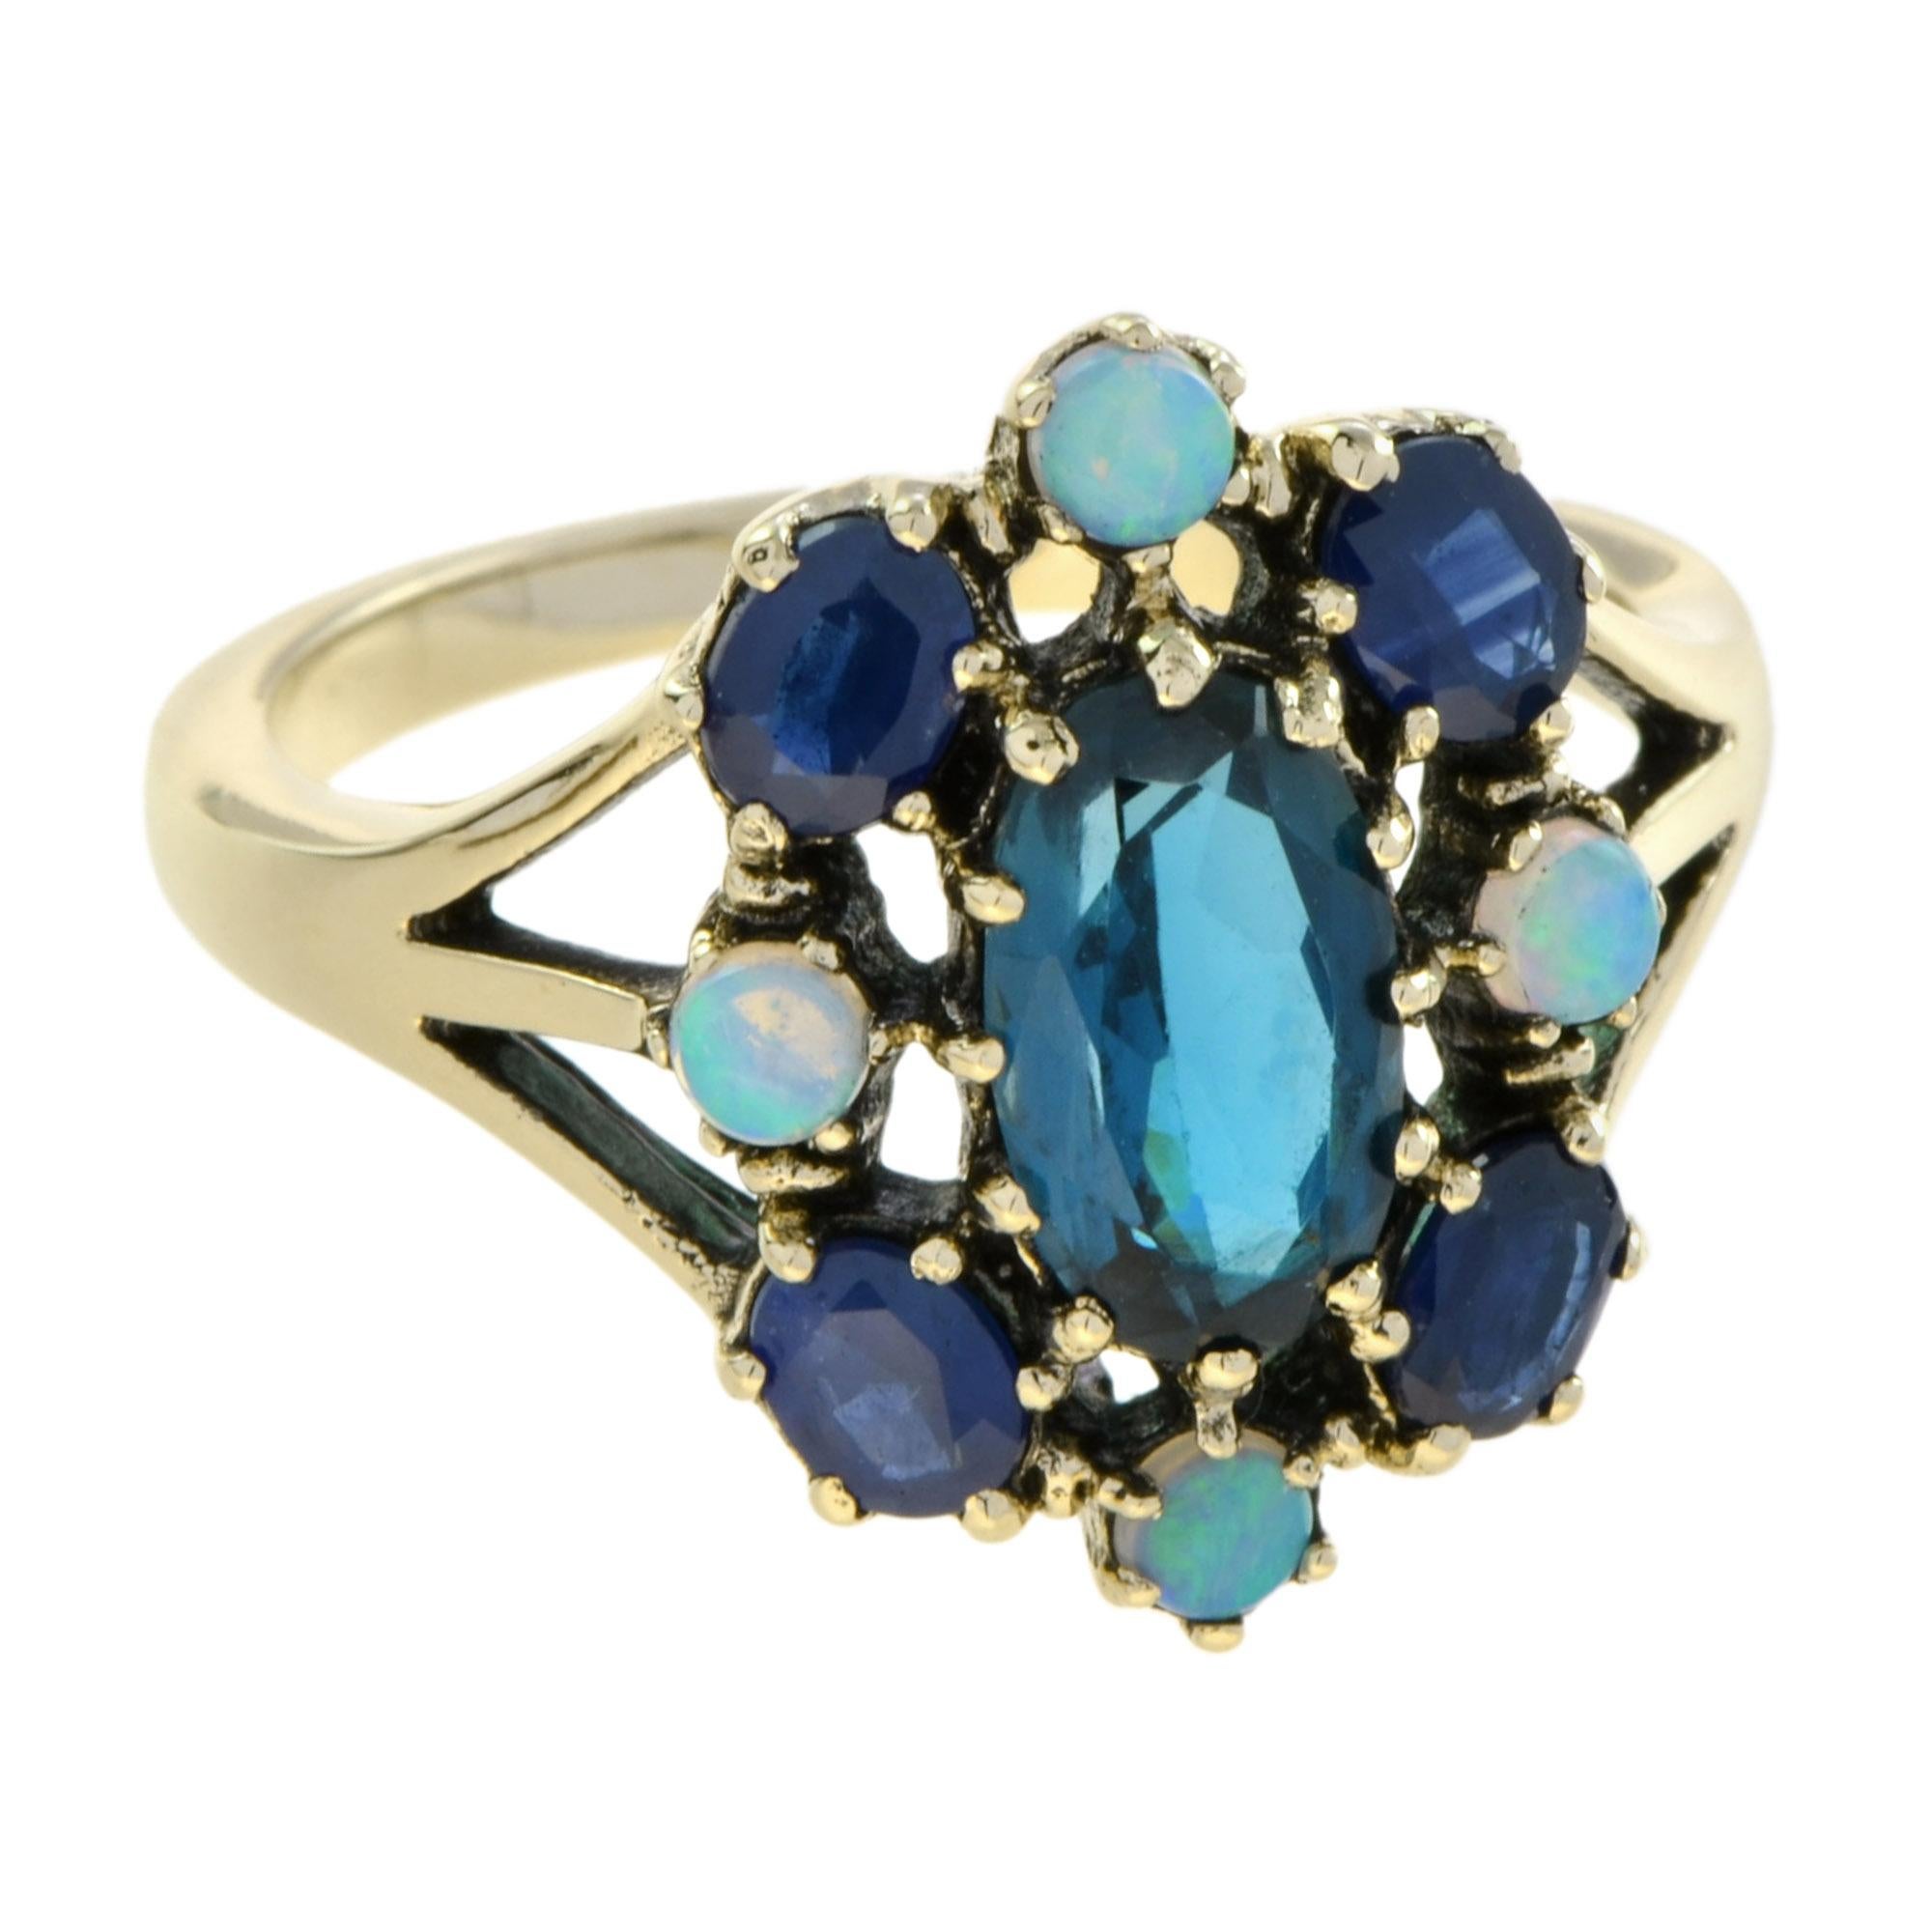 A perfect gift for a friend or family member, this blue gemstones ring is fashioned in popular 9k yellow gold and features a cluster of sapphires and opals surrounding the center oval London blue topaz. 

Ring Information
Metal: 9K Yellow Gold -